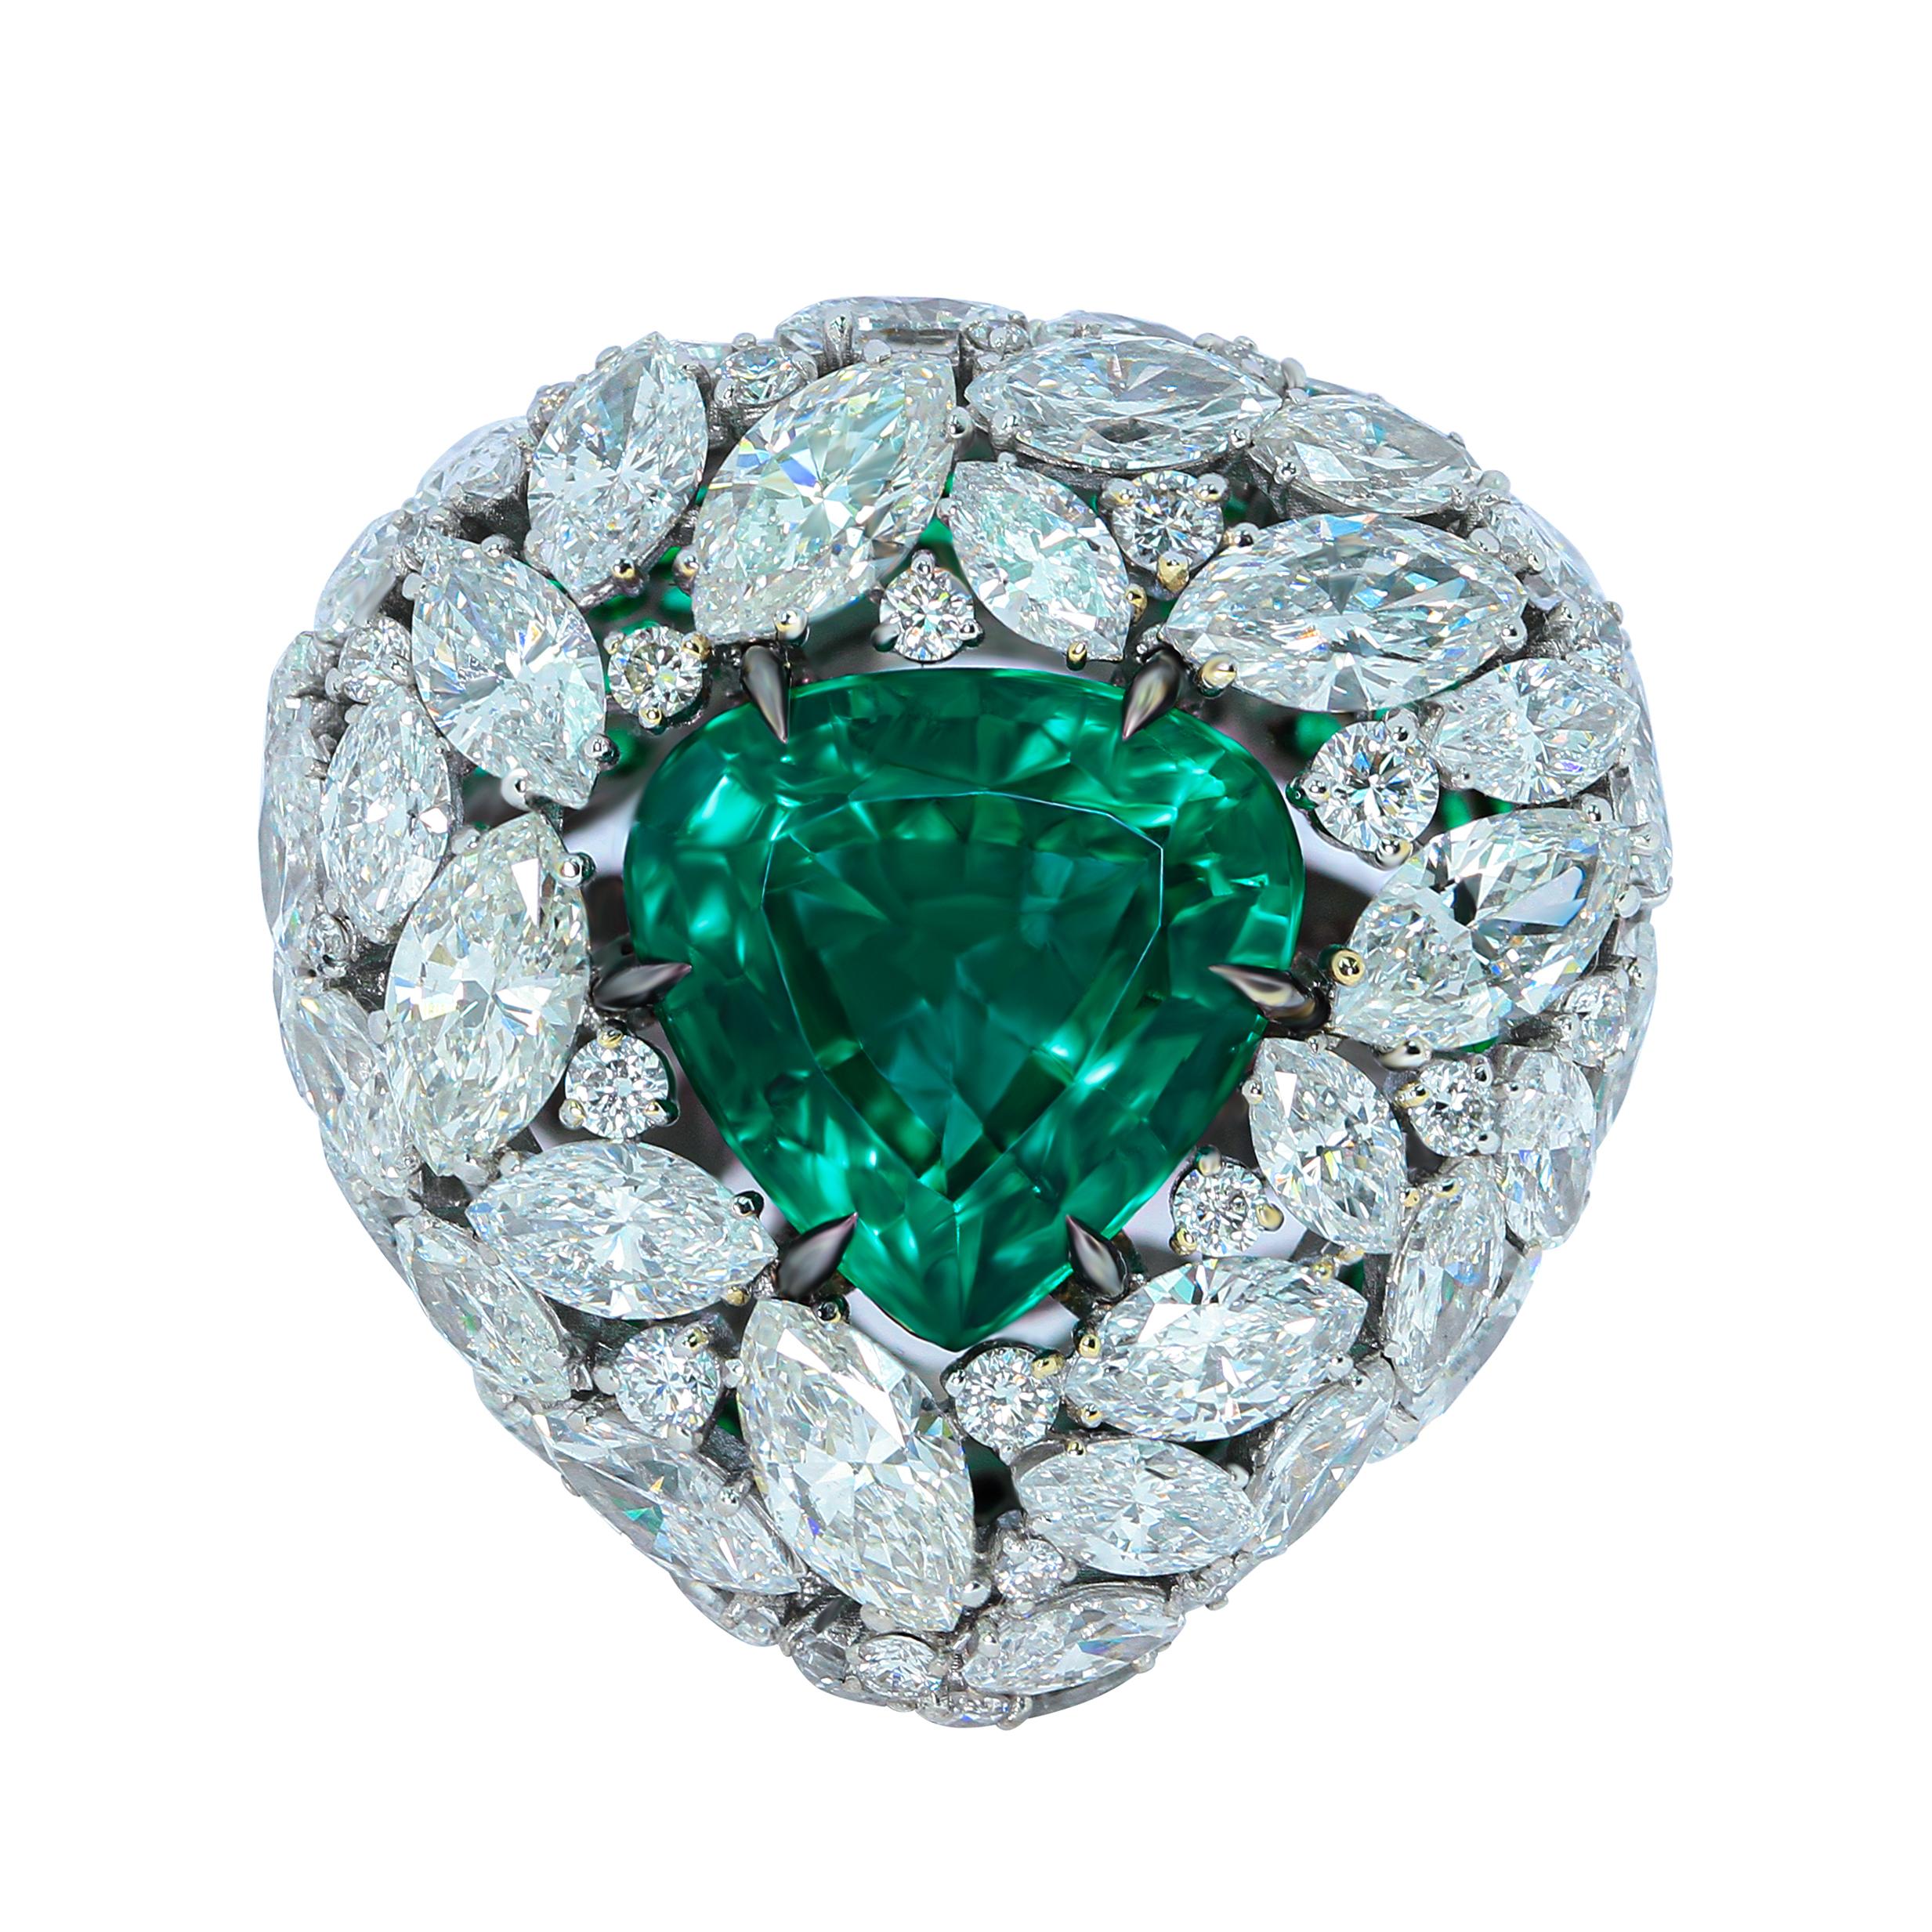 Emerald 3.70 Carat Diamonds Emeralds 18 Karat White Gold Ring

What could be more elegant than a combination of cold 18 Karat White Gold, Diamonds and a bright spot of color in the form of an Emerald? Right, nothing. 42 Marquise-shape Diamonds